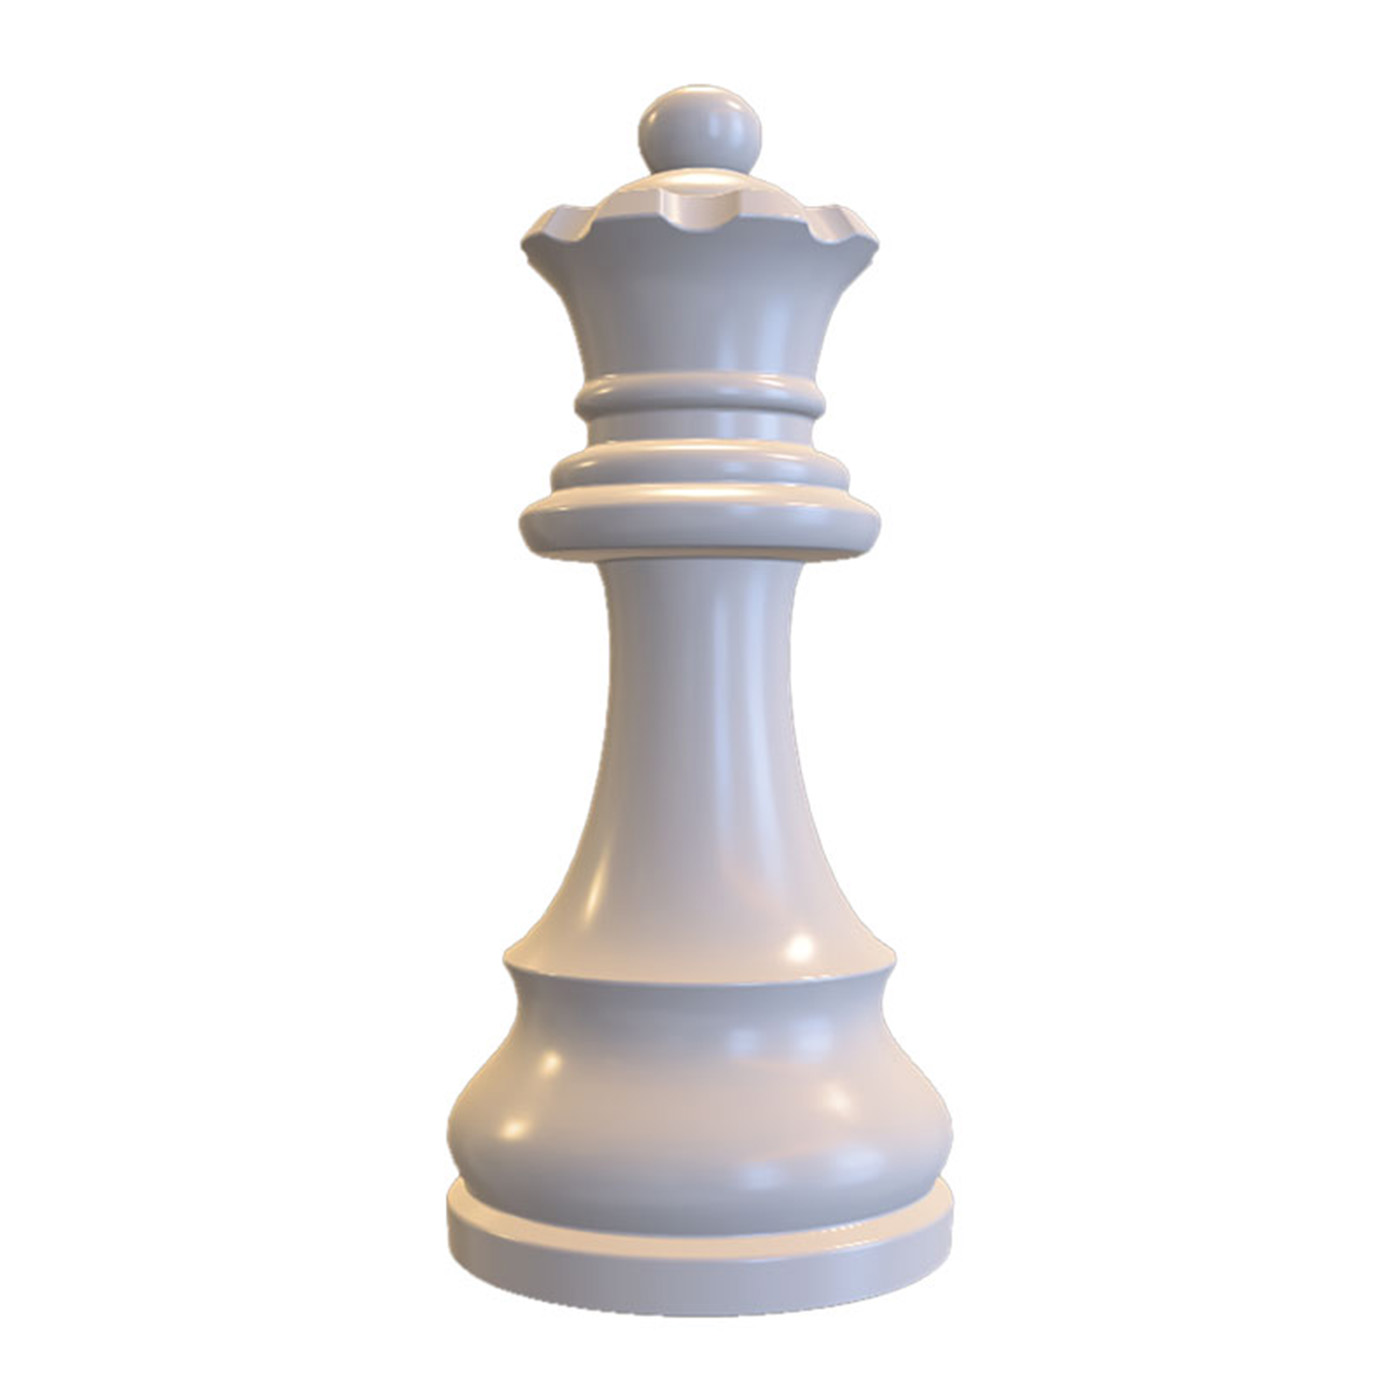 Resin Chess Queen Statue - White 10x10x21cm for Sale at Mobelli